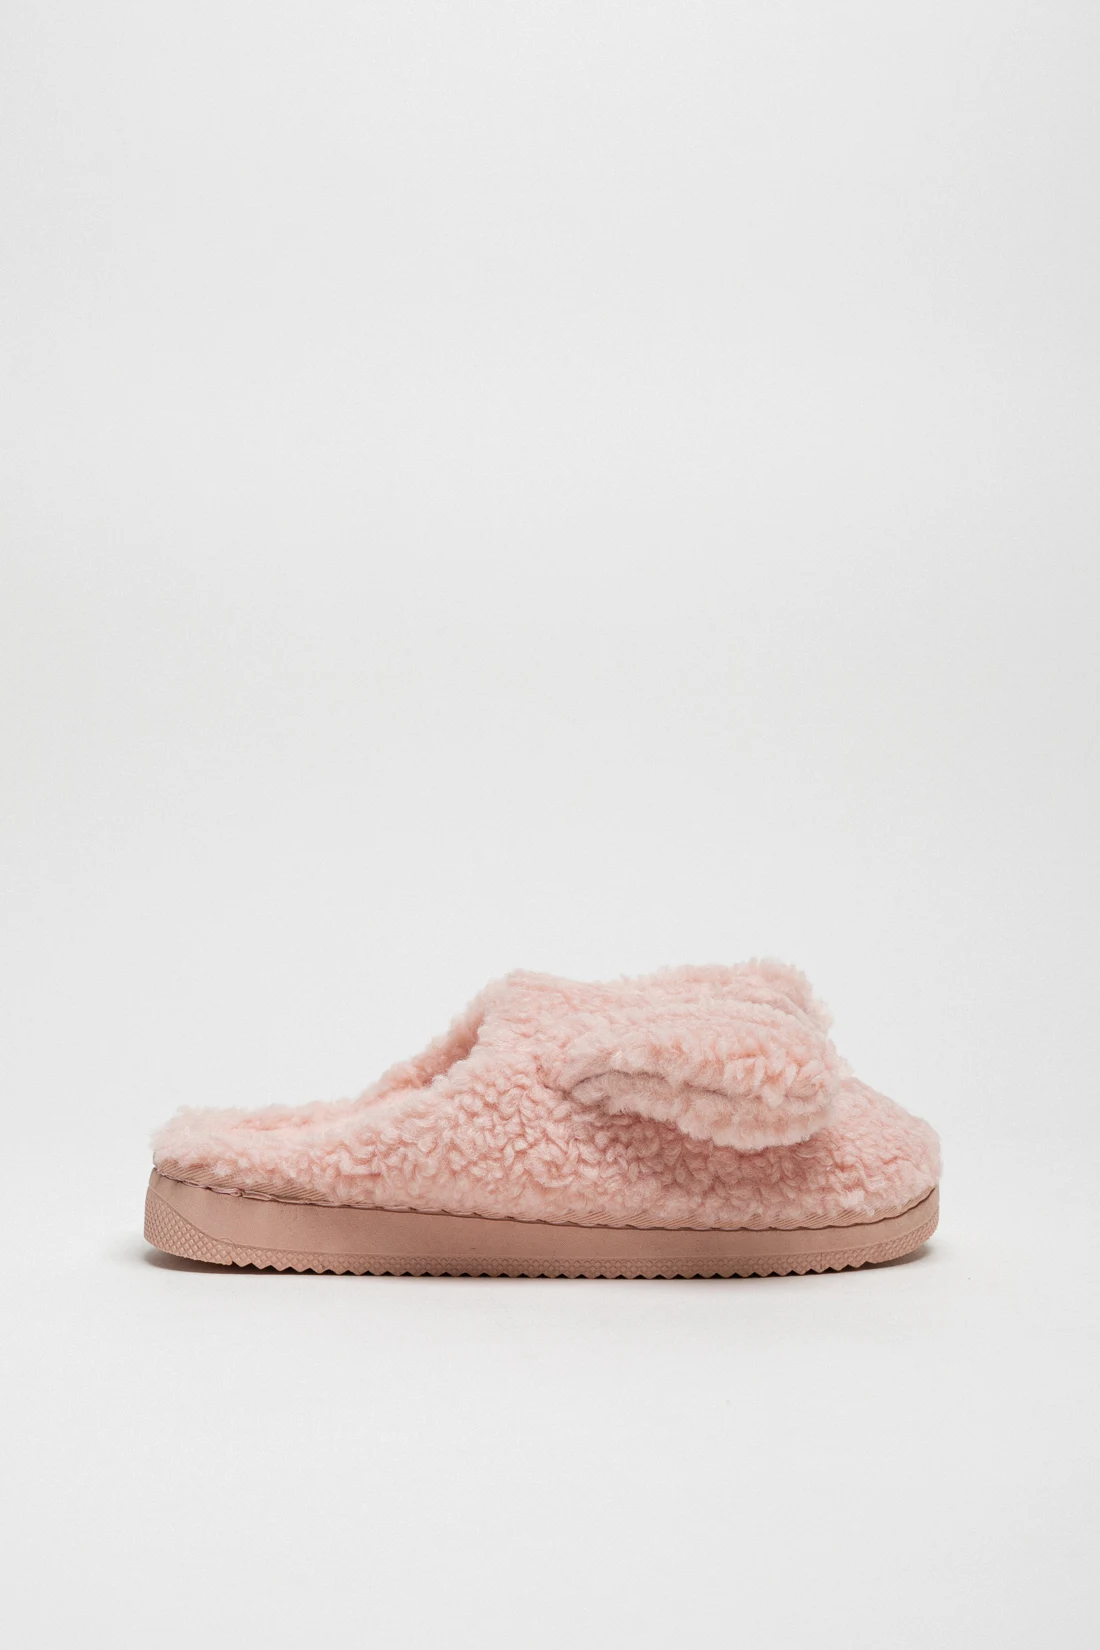 MAUS SNEAKERS - PINK